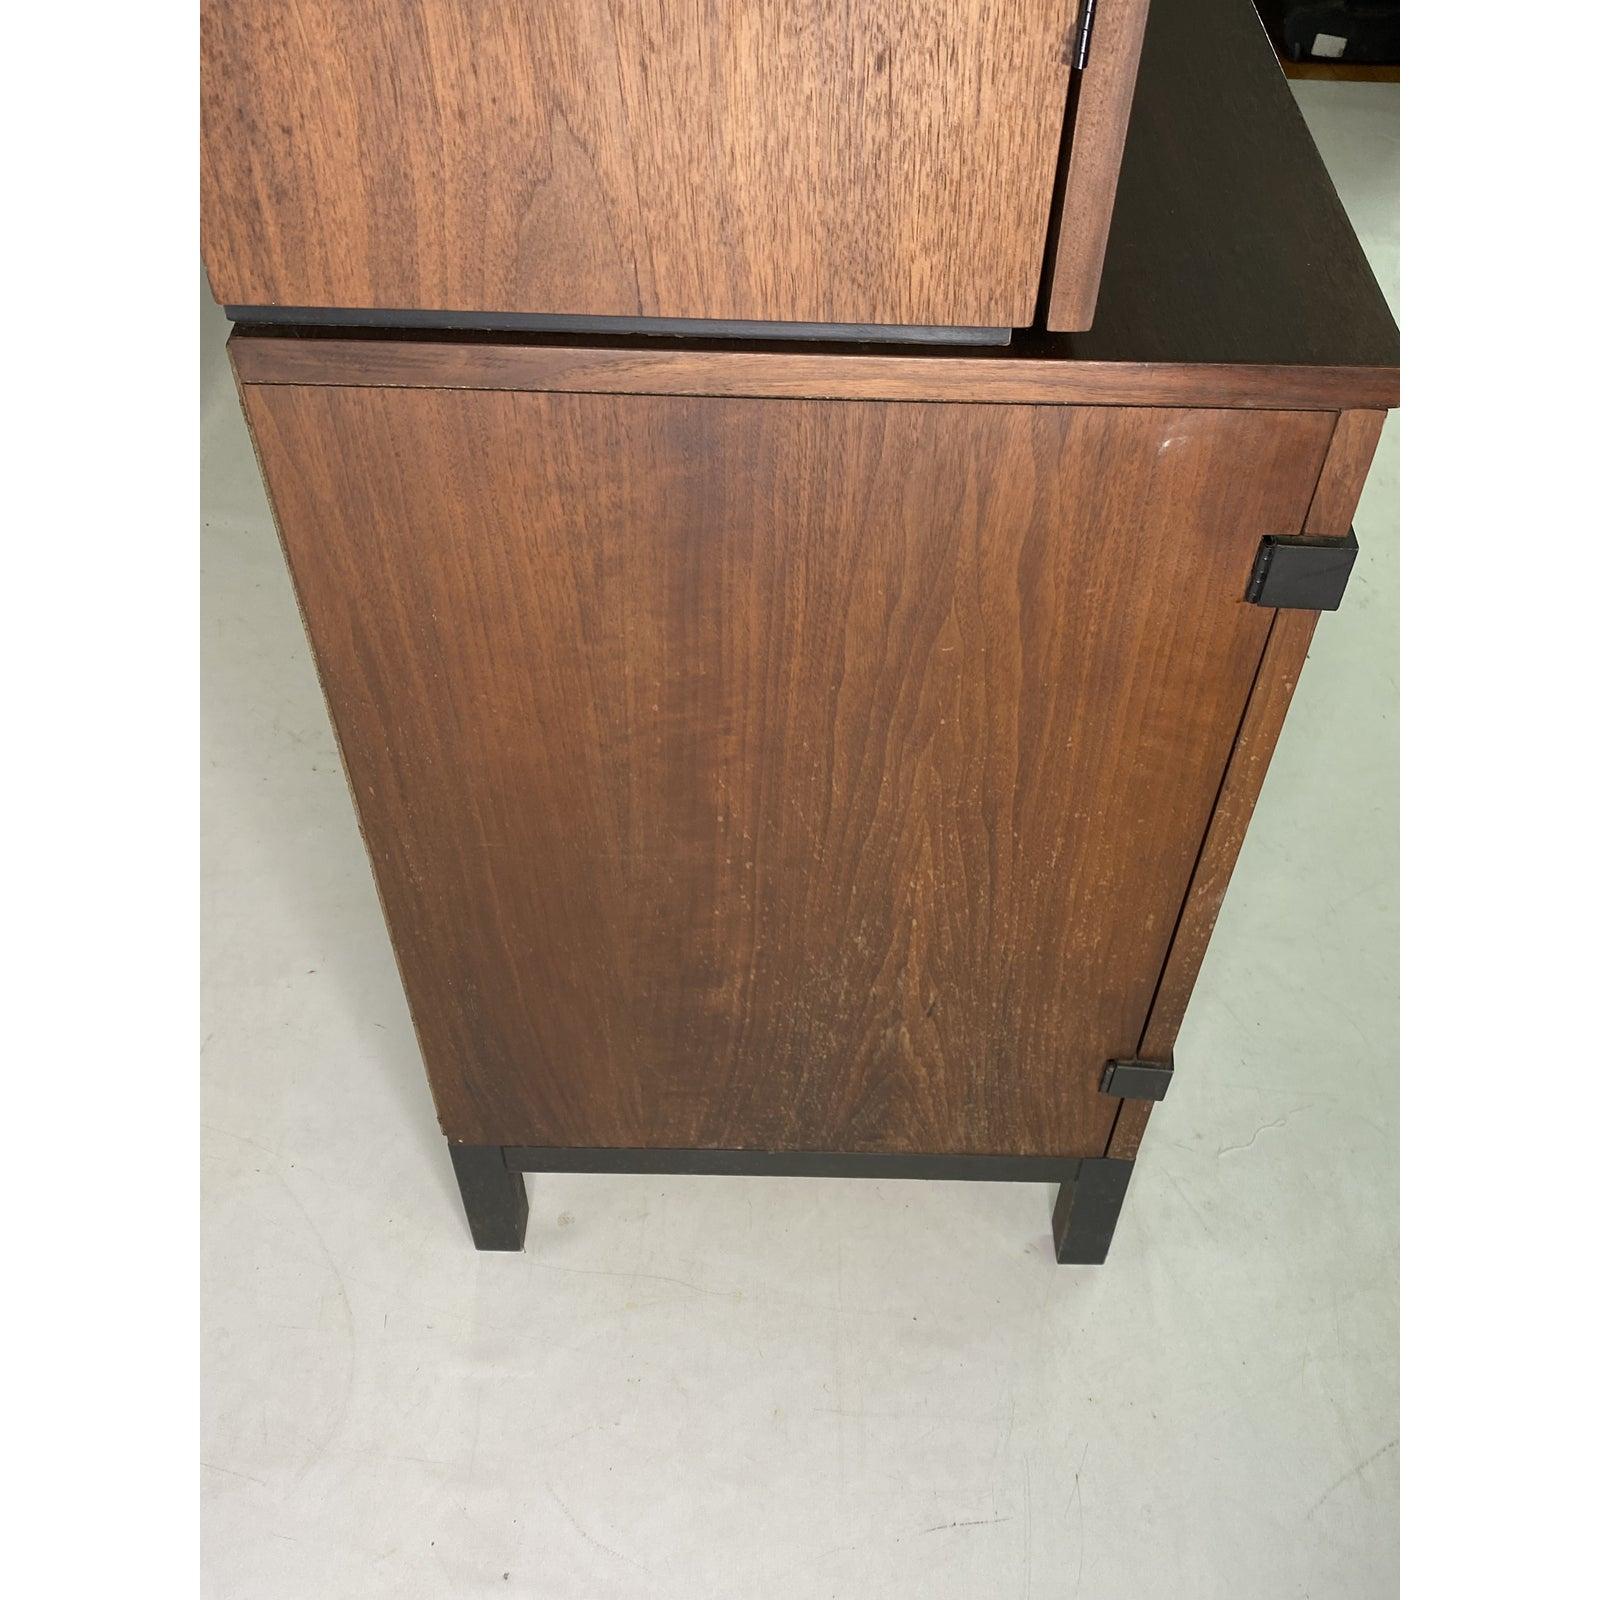 Mid-Century Modern Mid-Century Walnut Hutch / China Cabinet by Milo Baughman for Directional